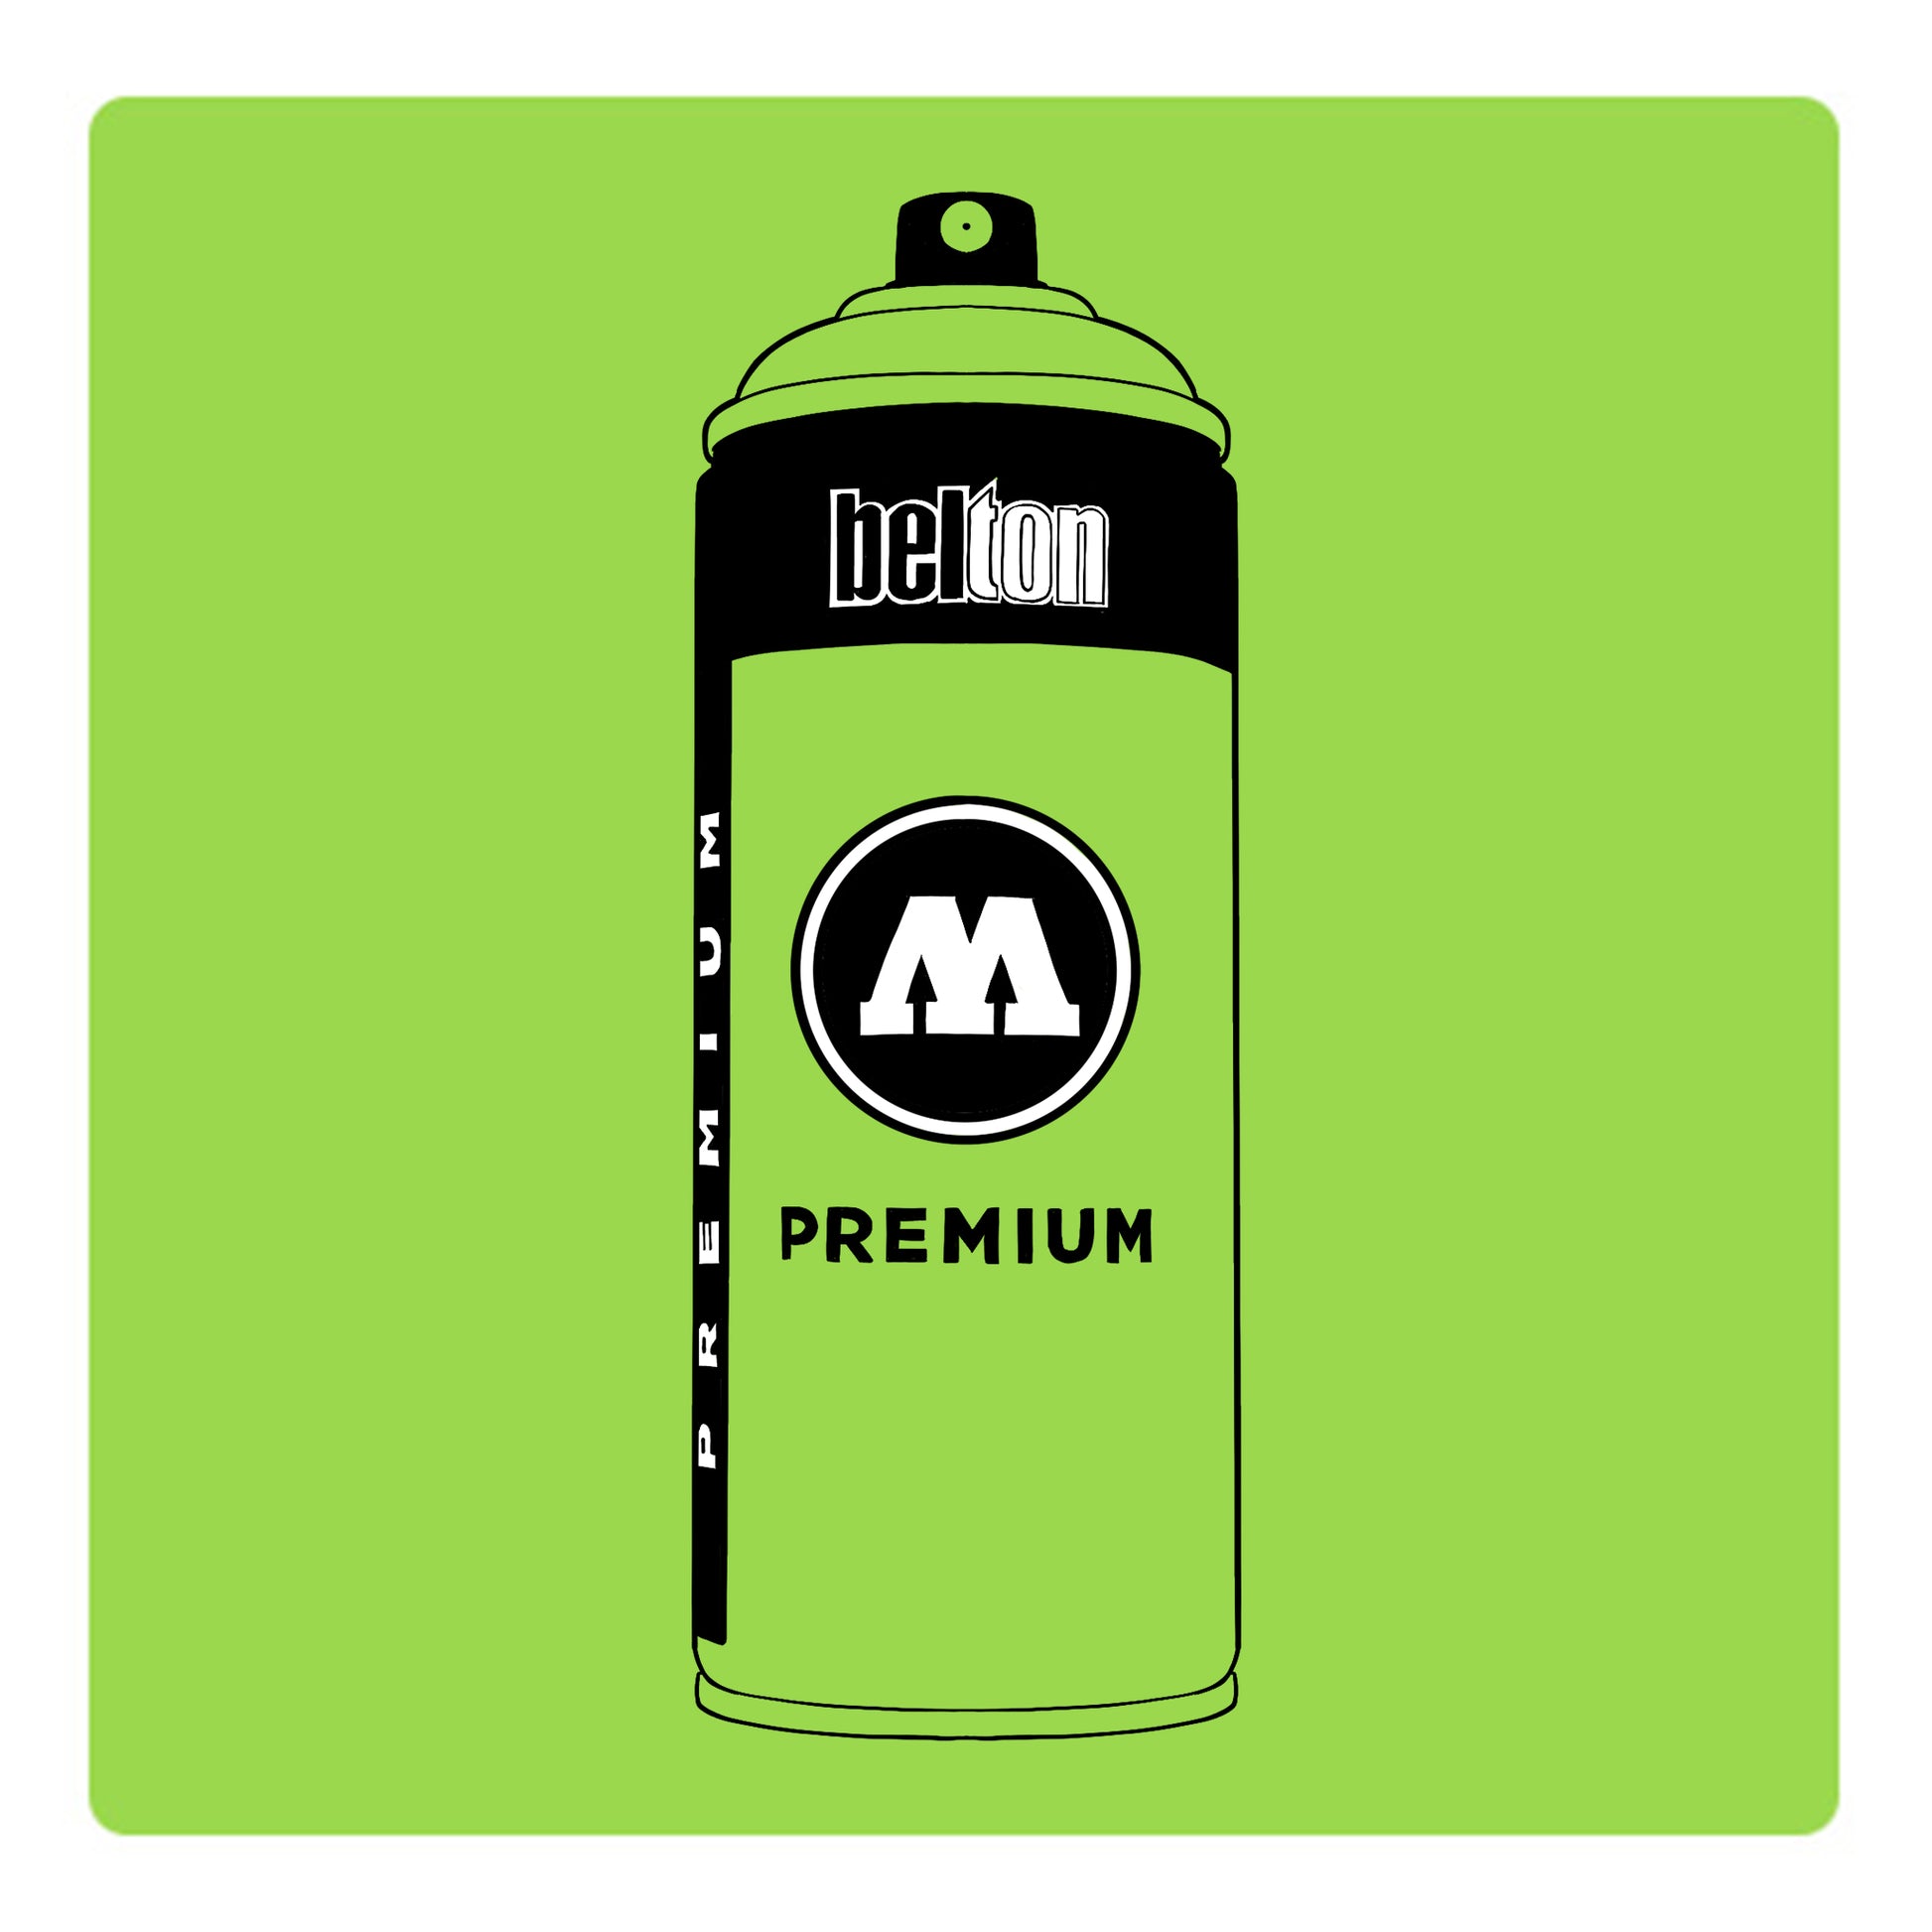 A black outline drawing of a bright lime green spray paint can with the words "belton","premium" and the letter"M" written on the face in black and white font. The background is a color swatch of the same bright lime green with a white border